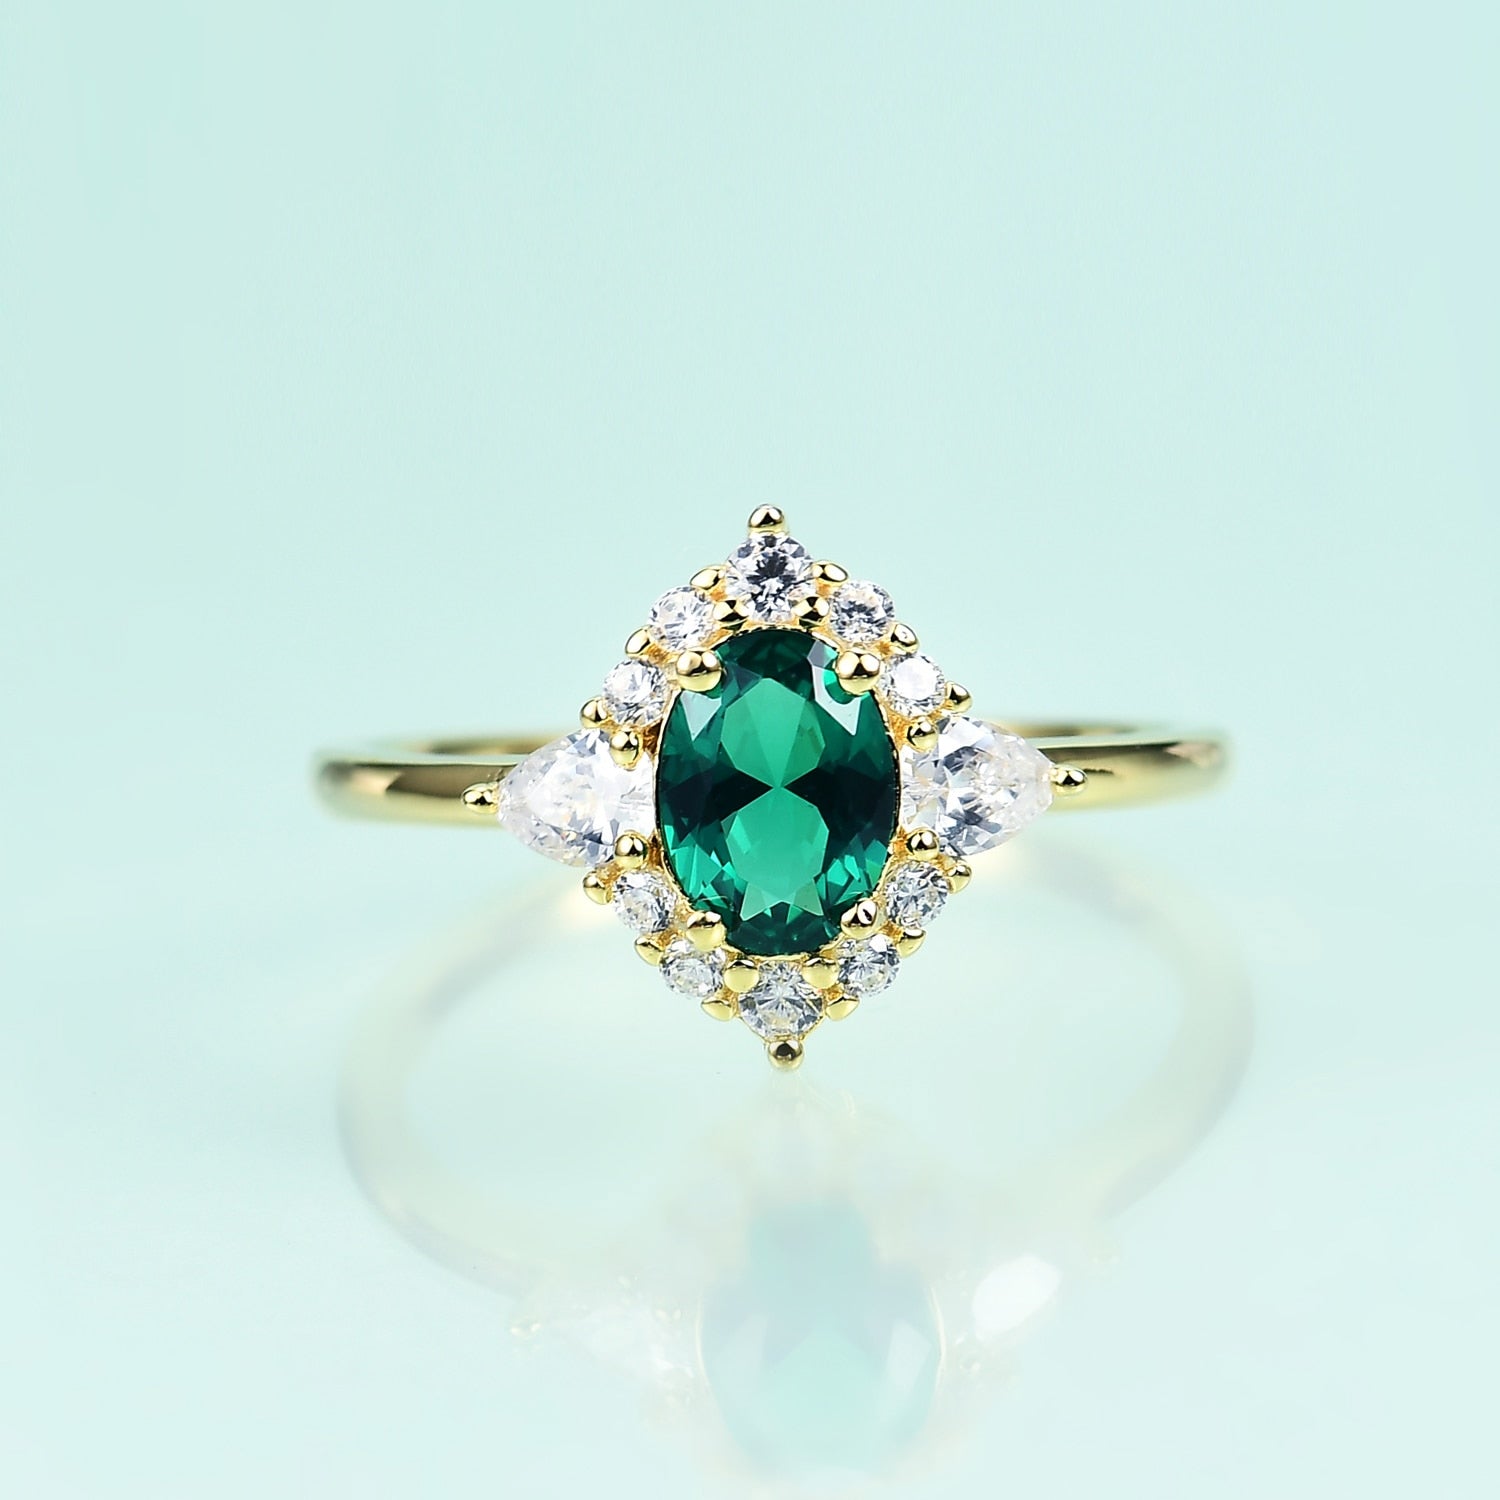 Gold emerald ring with diamonds vintage style engagement ring Rosery Poetry